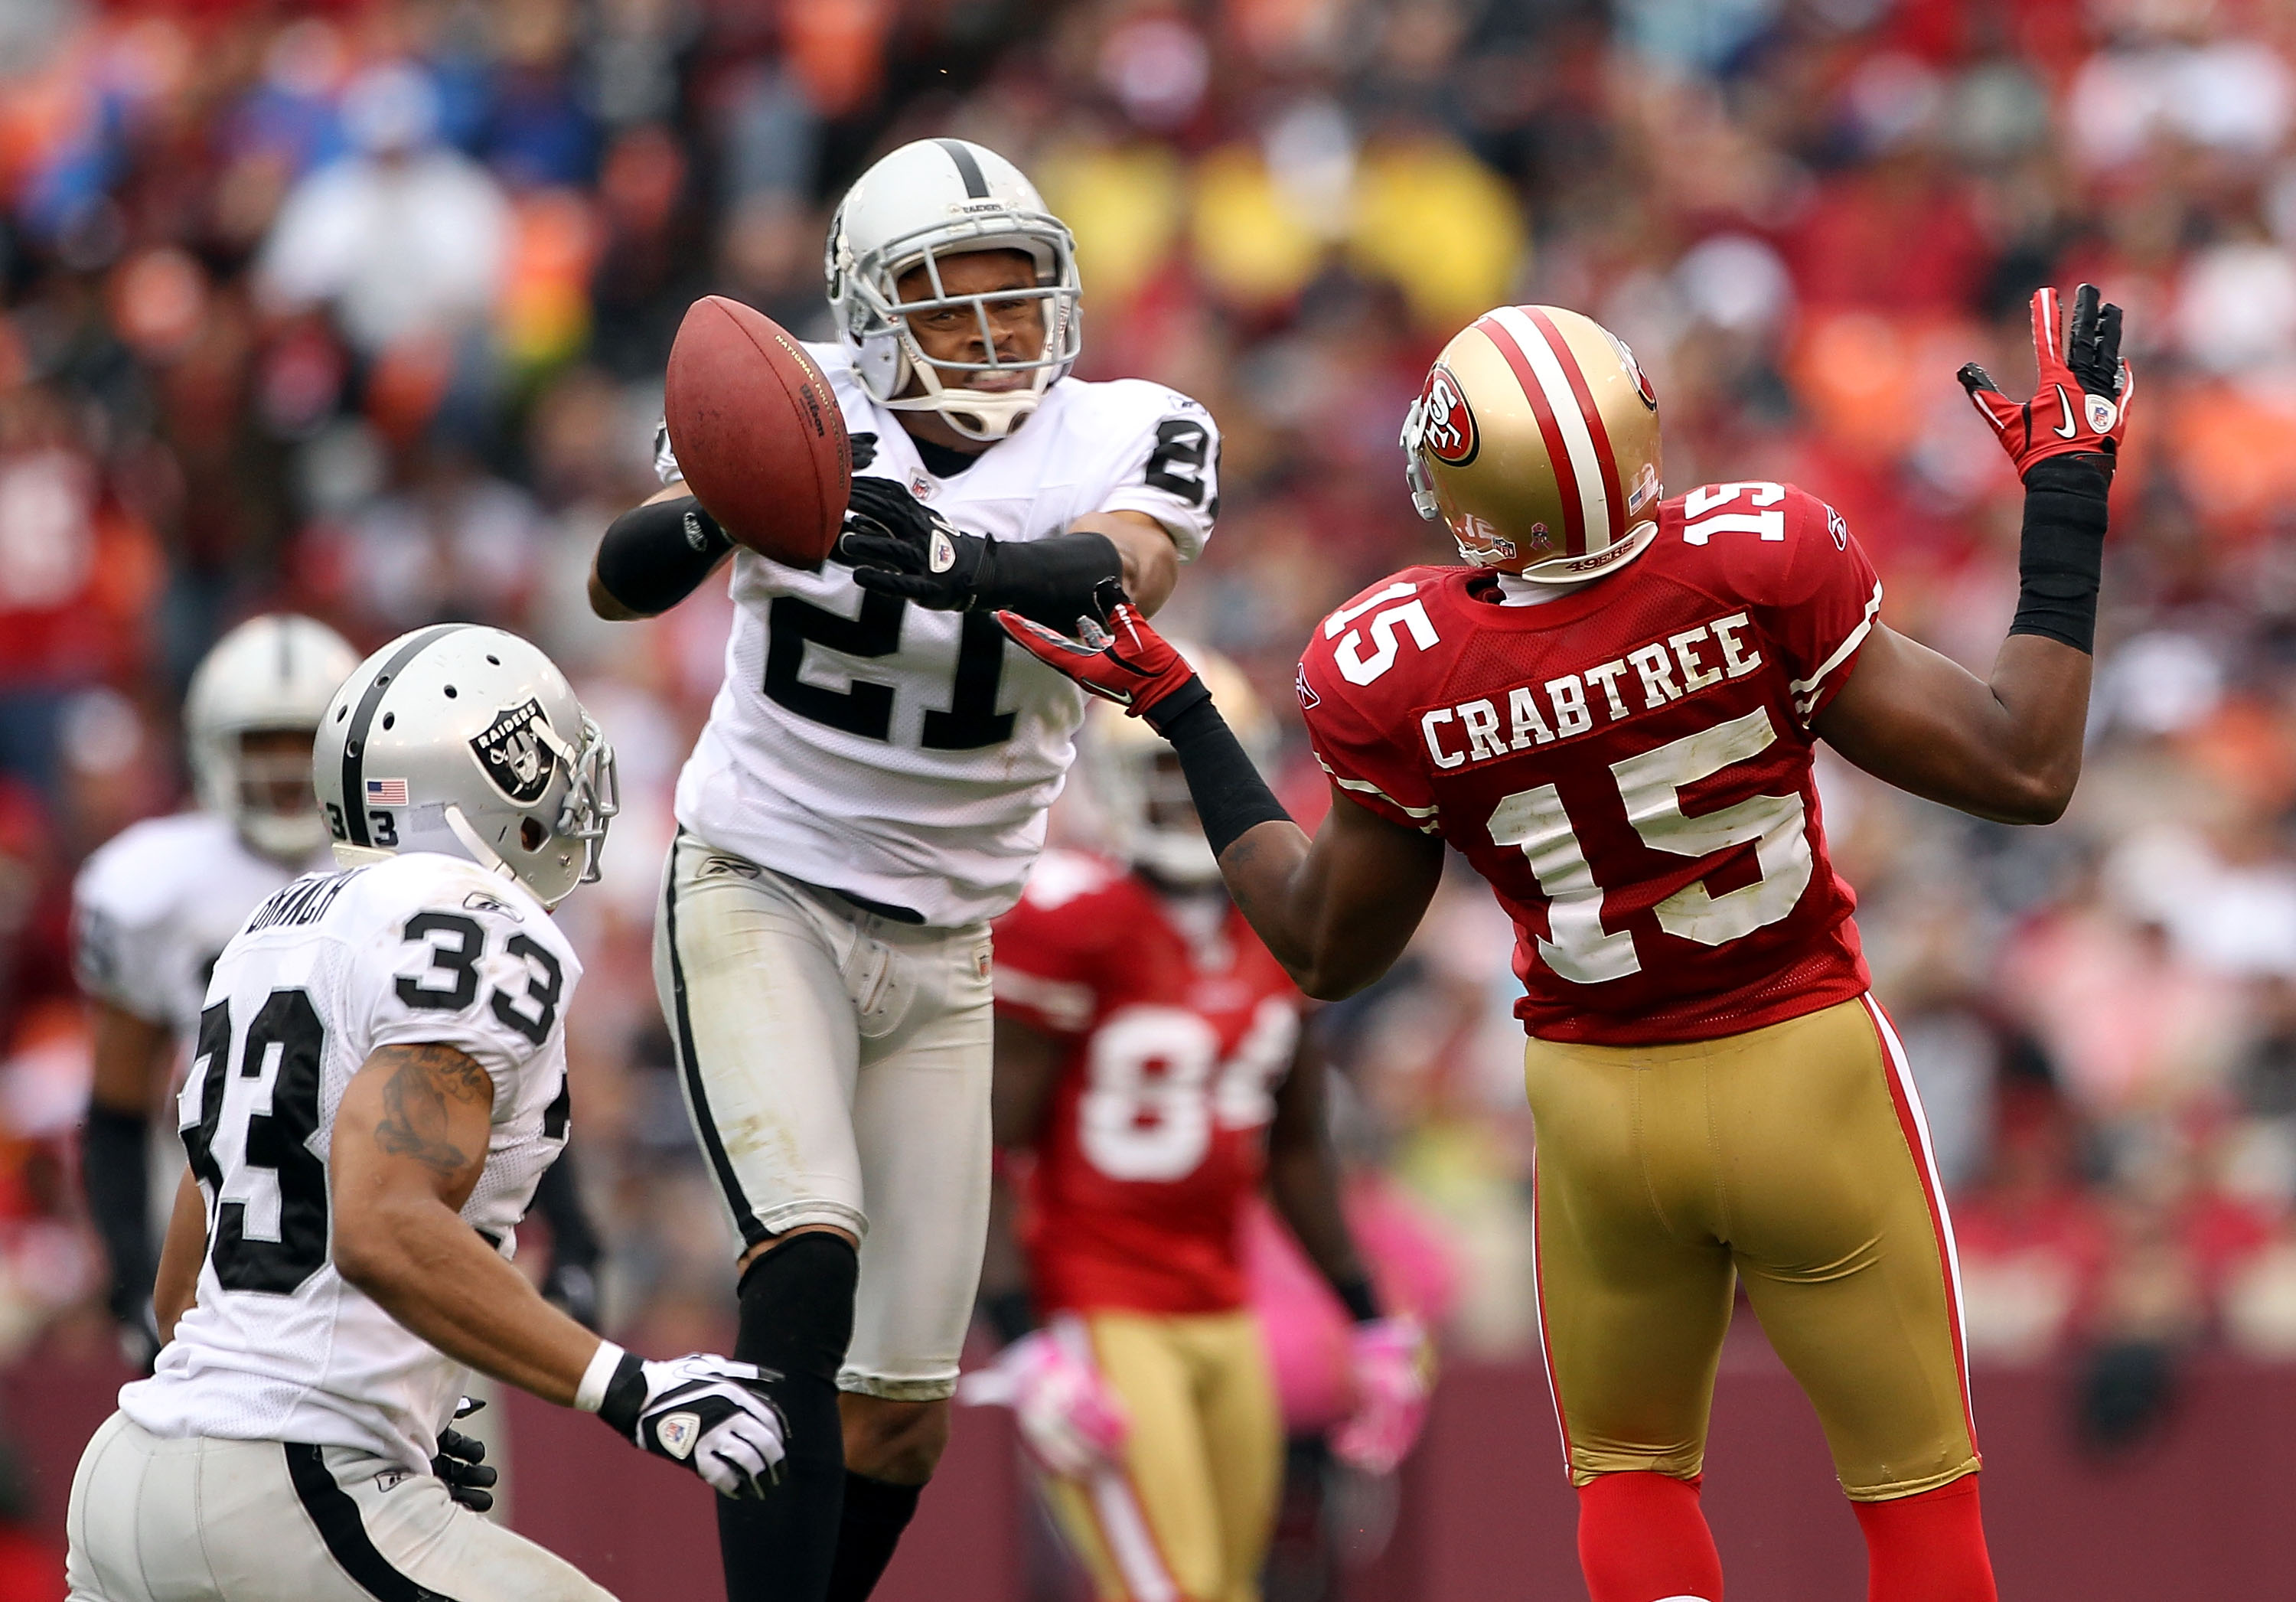 SAN FRANCISCO - OCTOBER 17:  Nnamdi Asomugha  #21 of the Oakland Raiders breaks up a pass intended for Michael Crabtree #15 of the San Francisco 49ers at Candlestick Park on October 17, 2010 in San Francisco, California.  (Photo by Ezra Shaw/Getty Images)